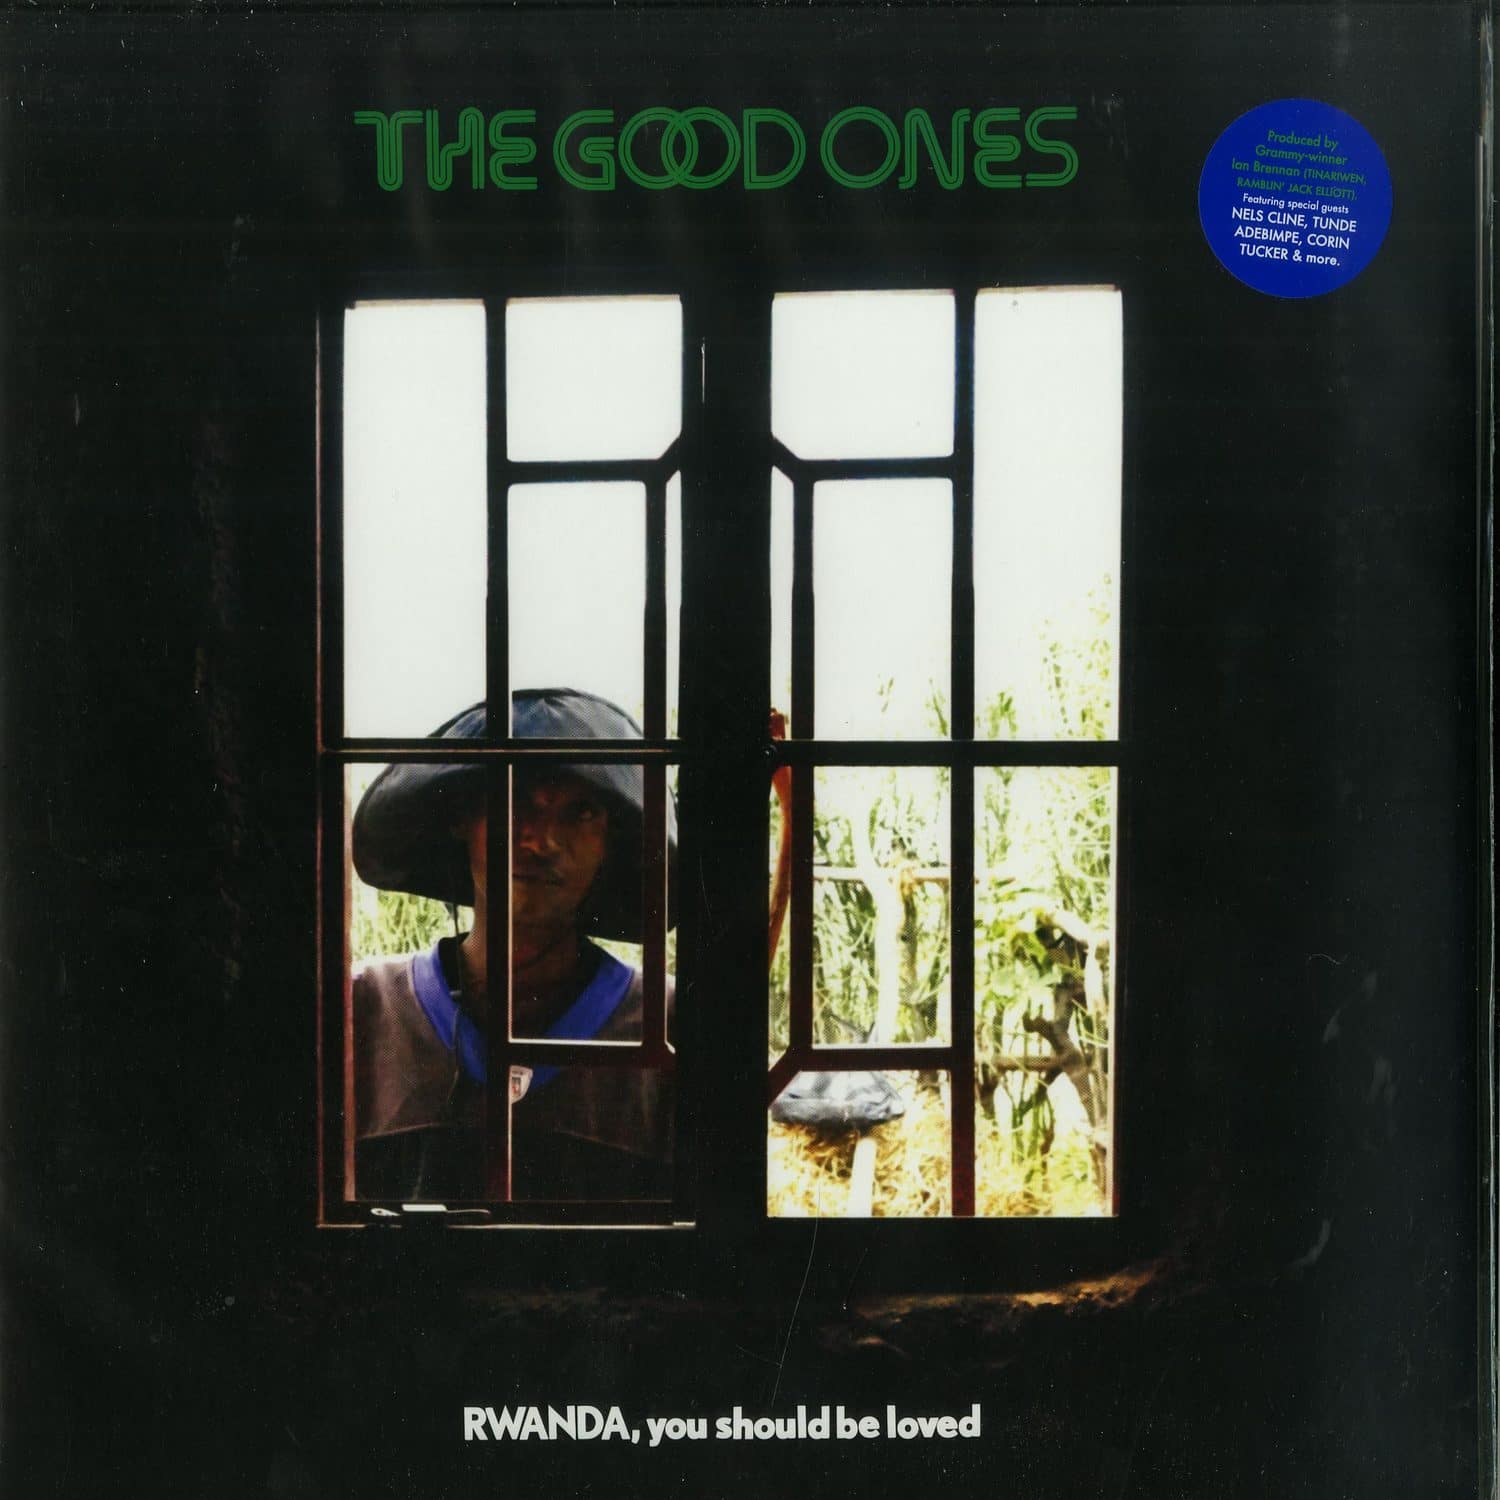 The Good Ones - RWANDA, YOU SHOULD BE LOVED 